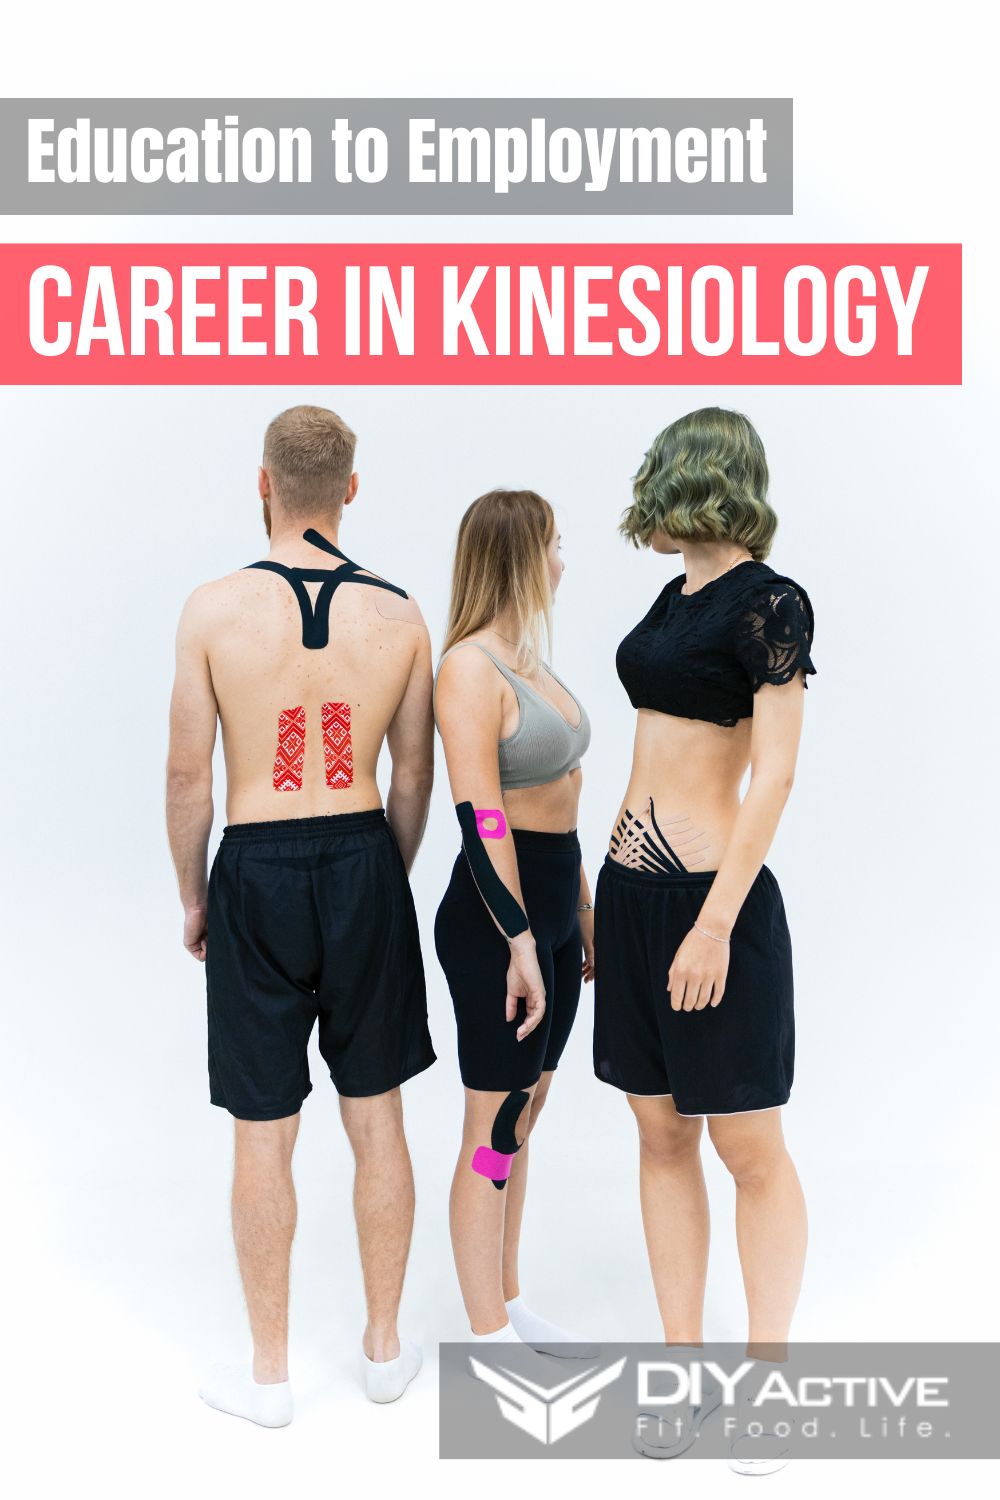 From Education to Employment, 6 Key Tips for Launching a Career in Kinesiology 